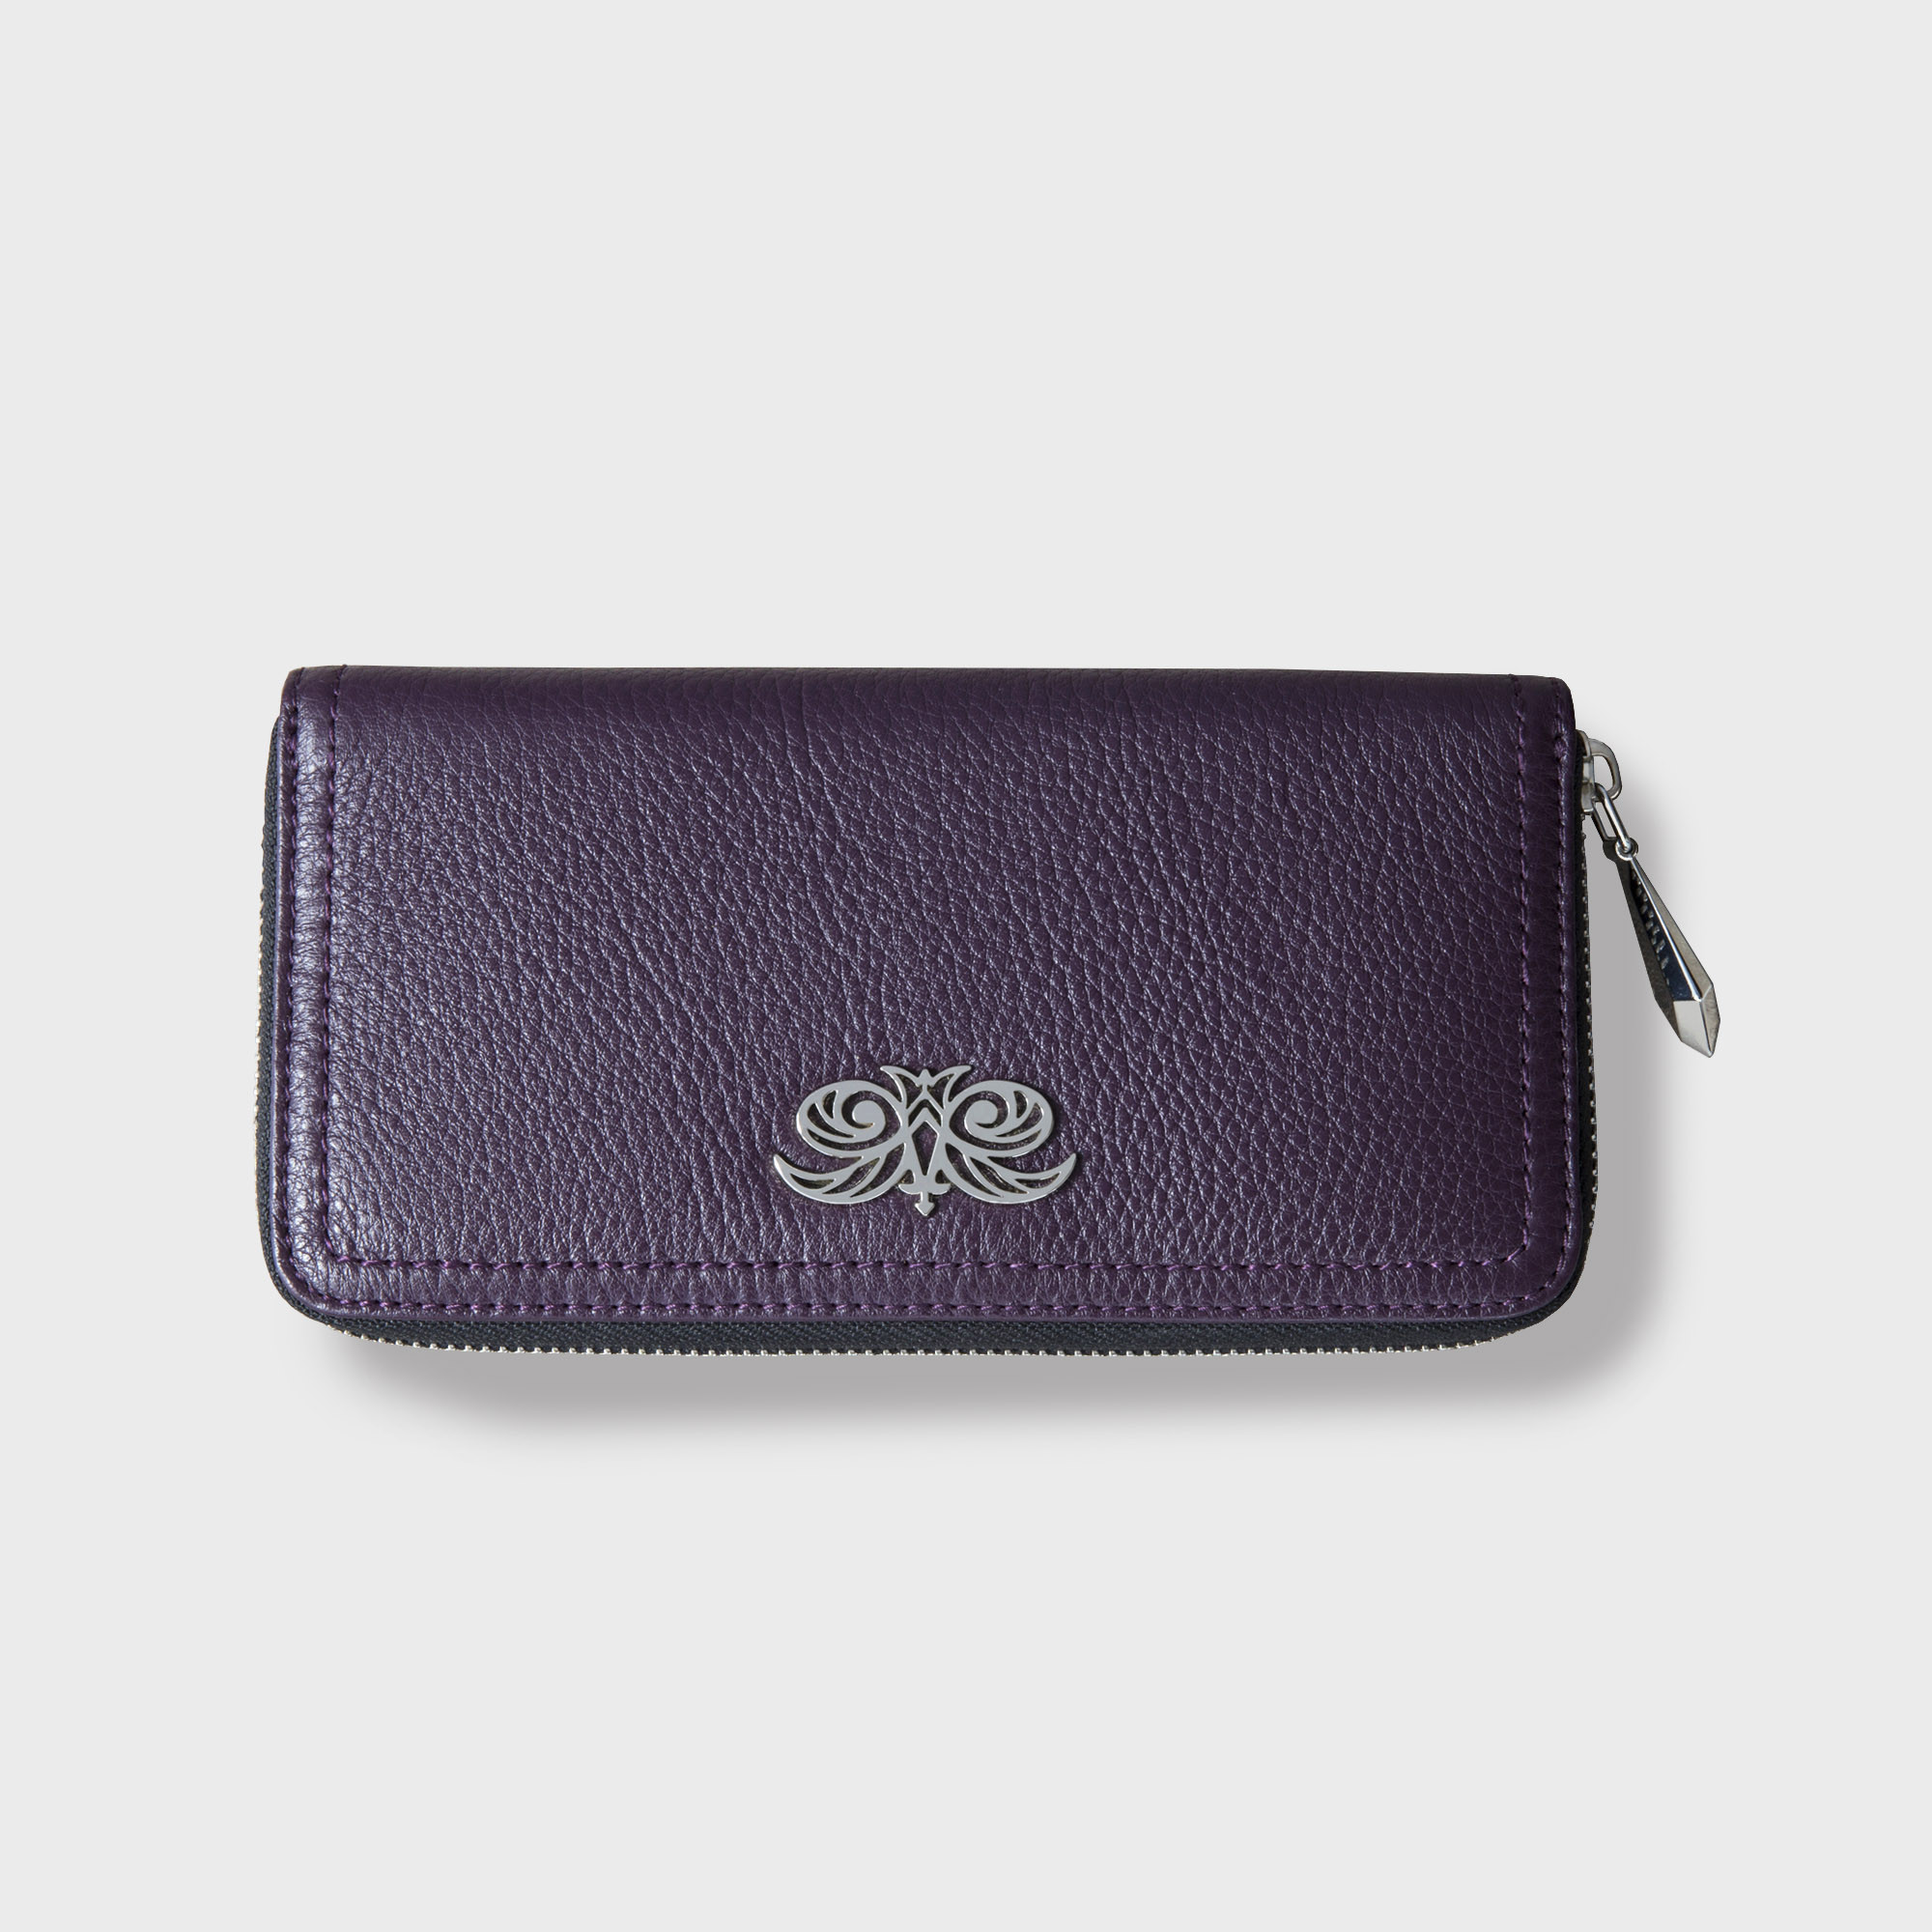 Continental wallet KYOTO in grained leather, purple color - front view on linen